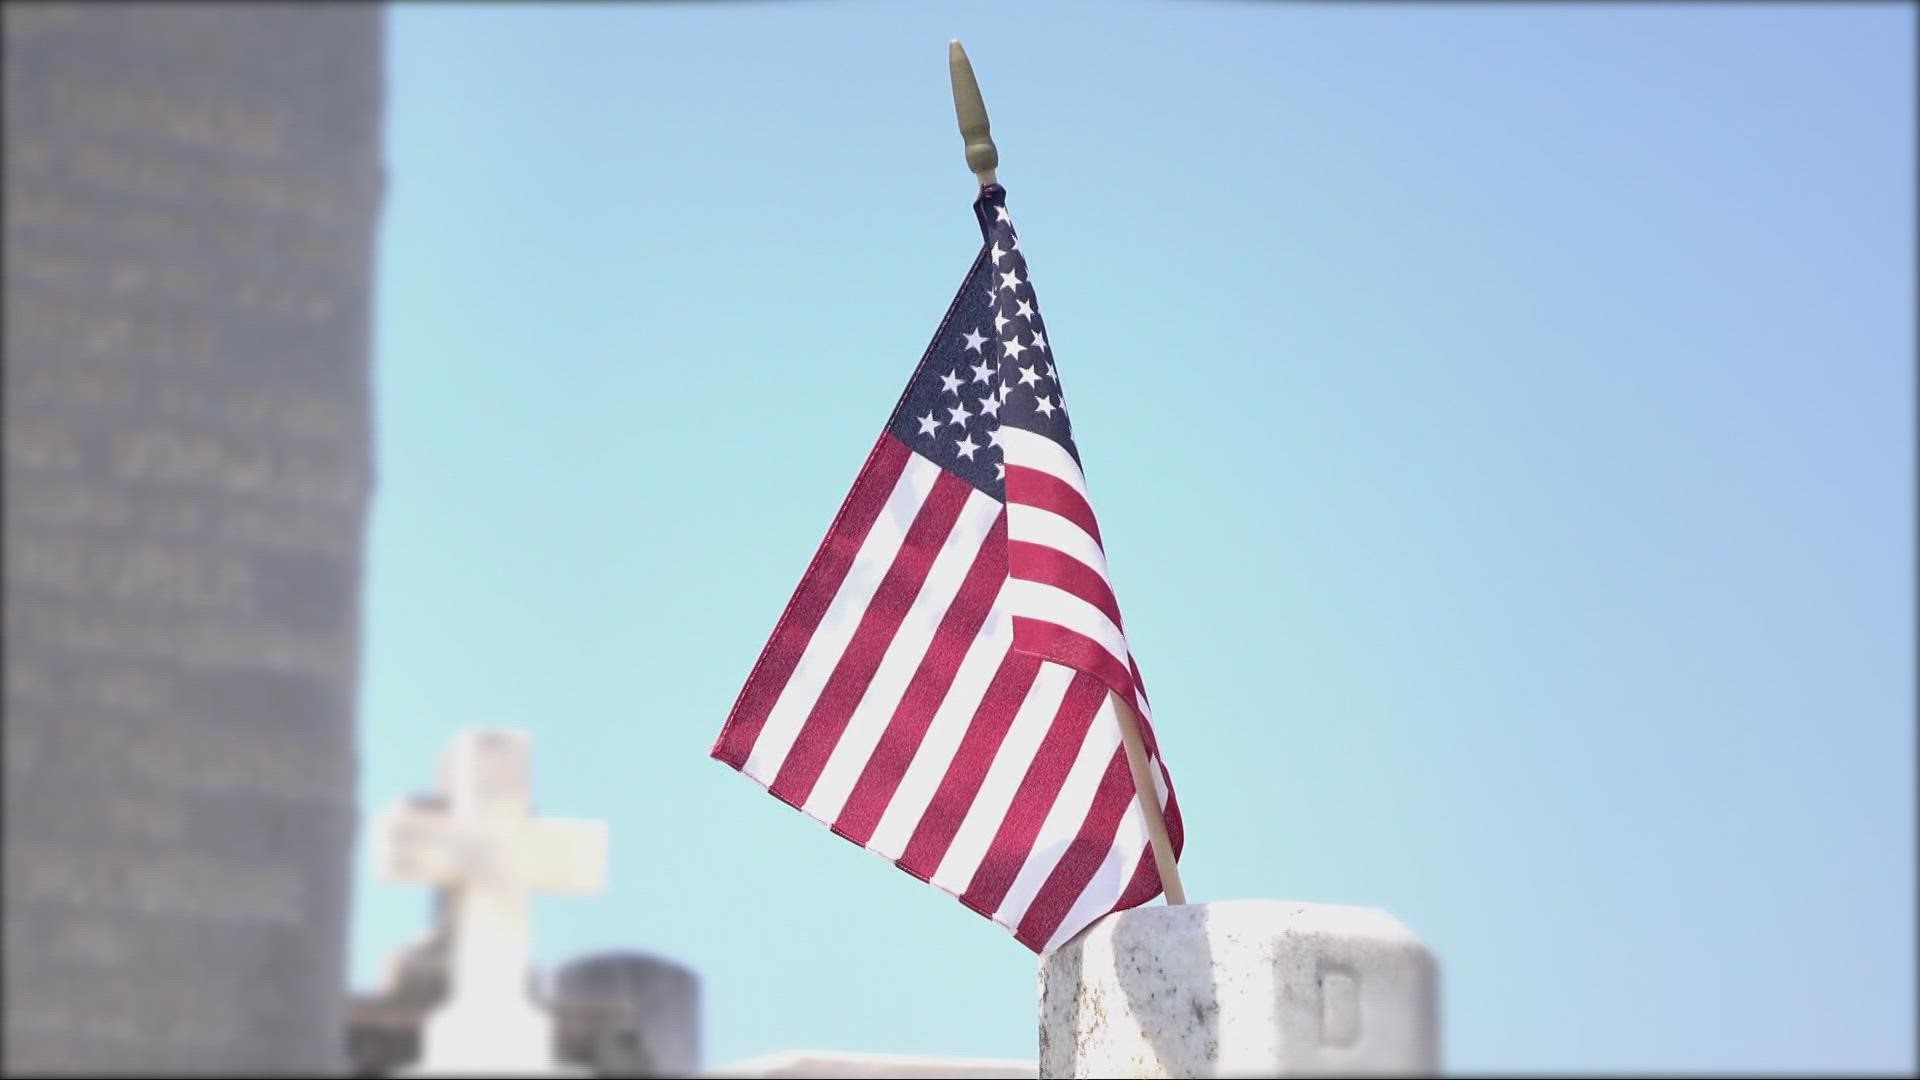 Each year on Veterans Day, the nation honors those who served in the United States military.